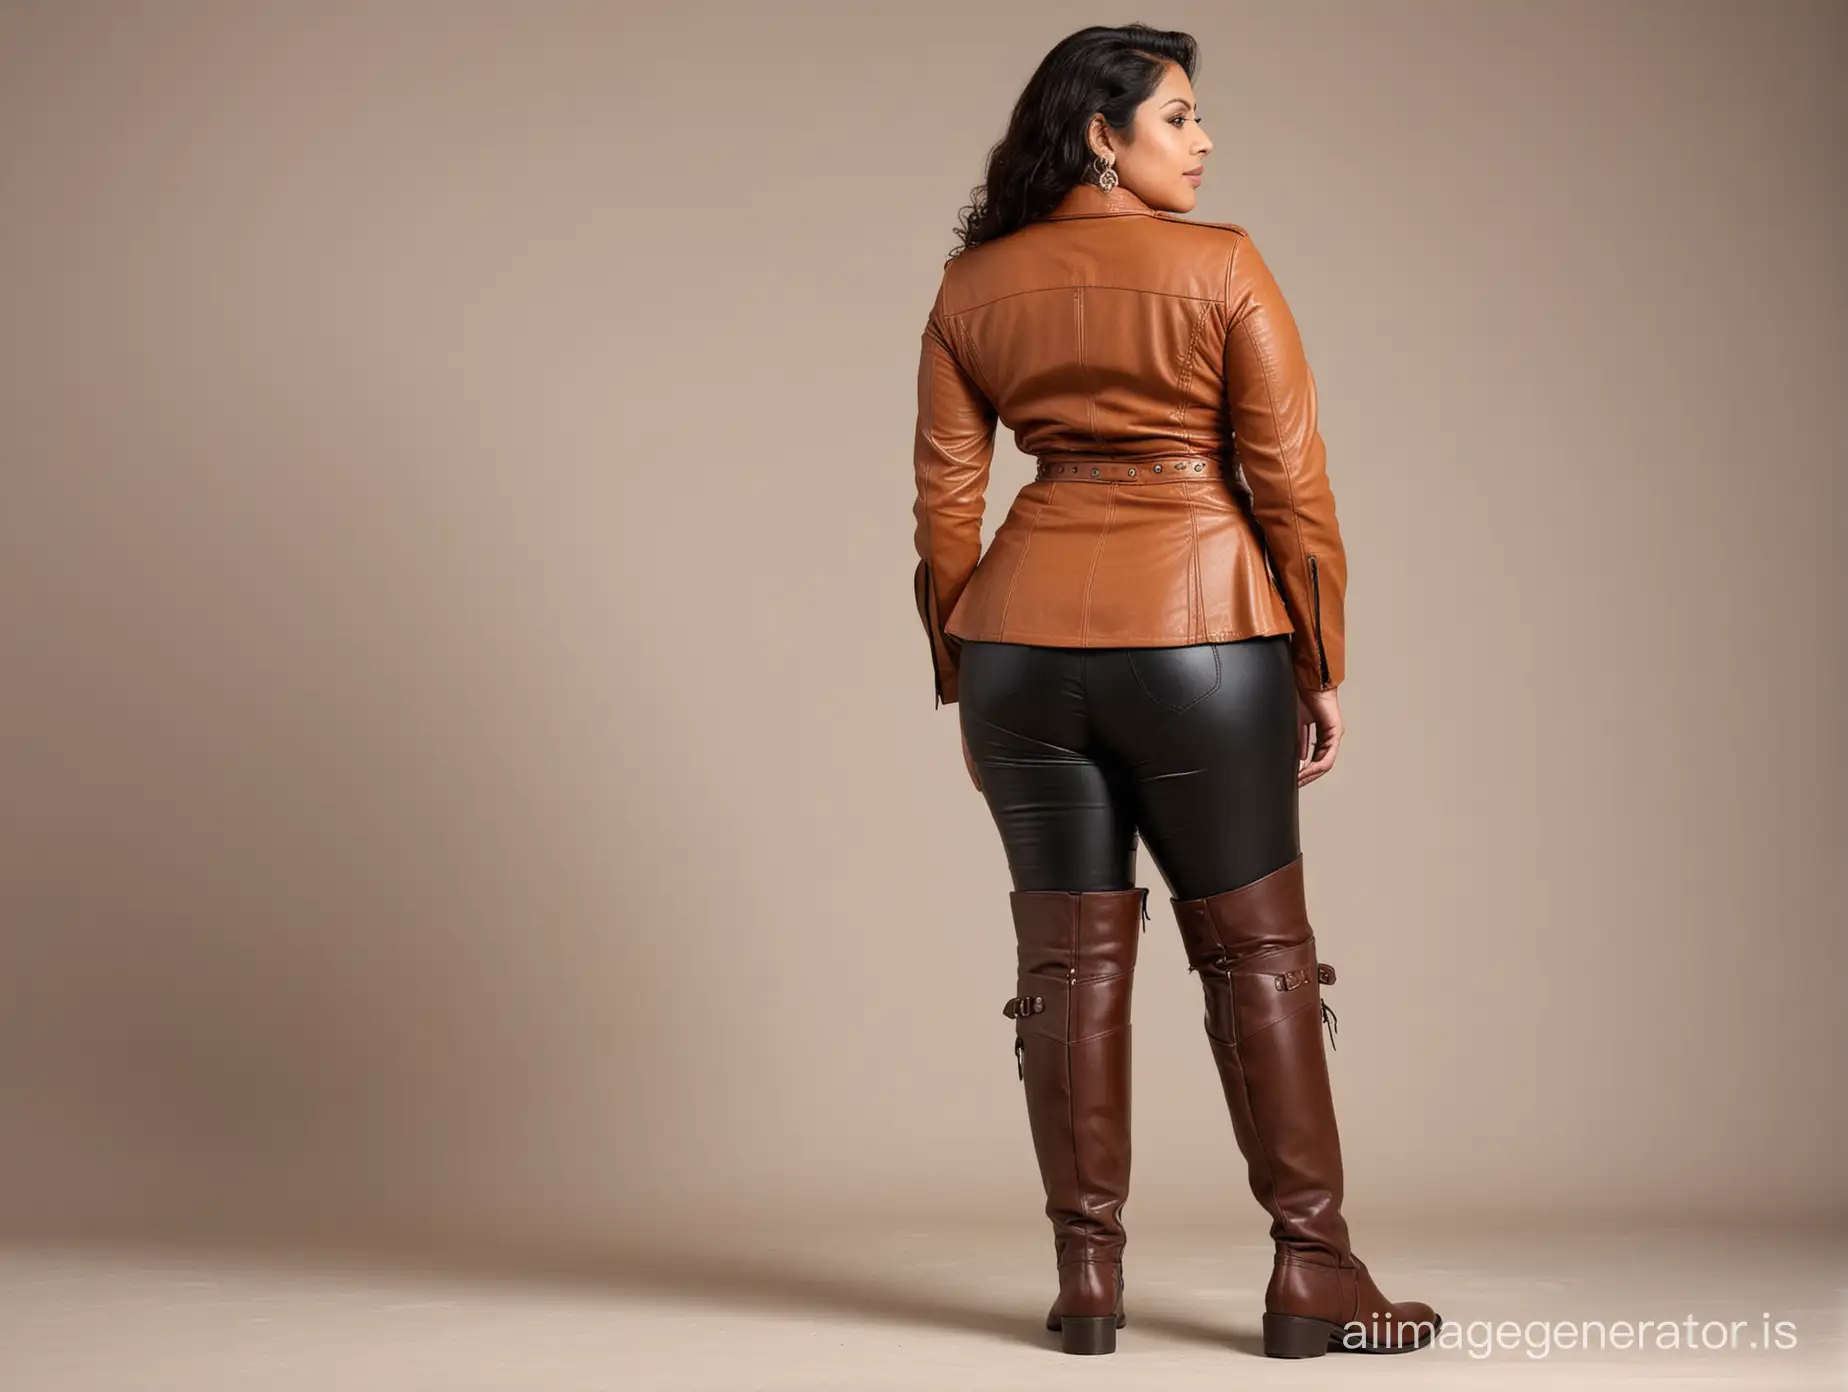 Generate full body back view image of one 45 year old busty and curvy semi plus size Indian woman wearing equestrian outfit and brown knee high riding boots picture should be of leather boots point of view